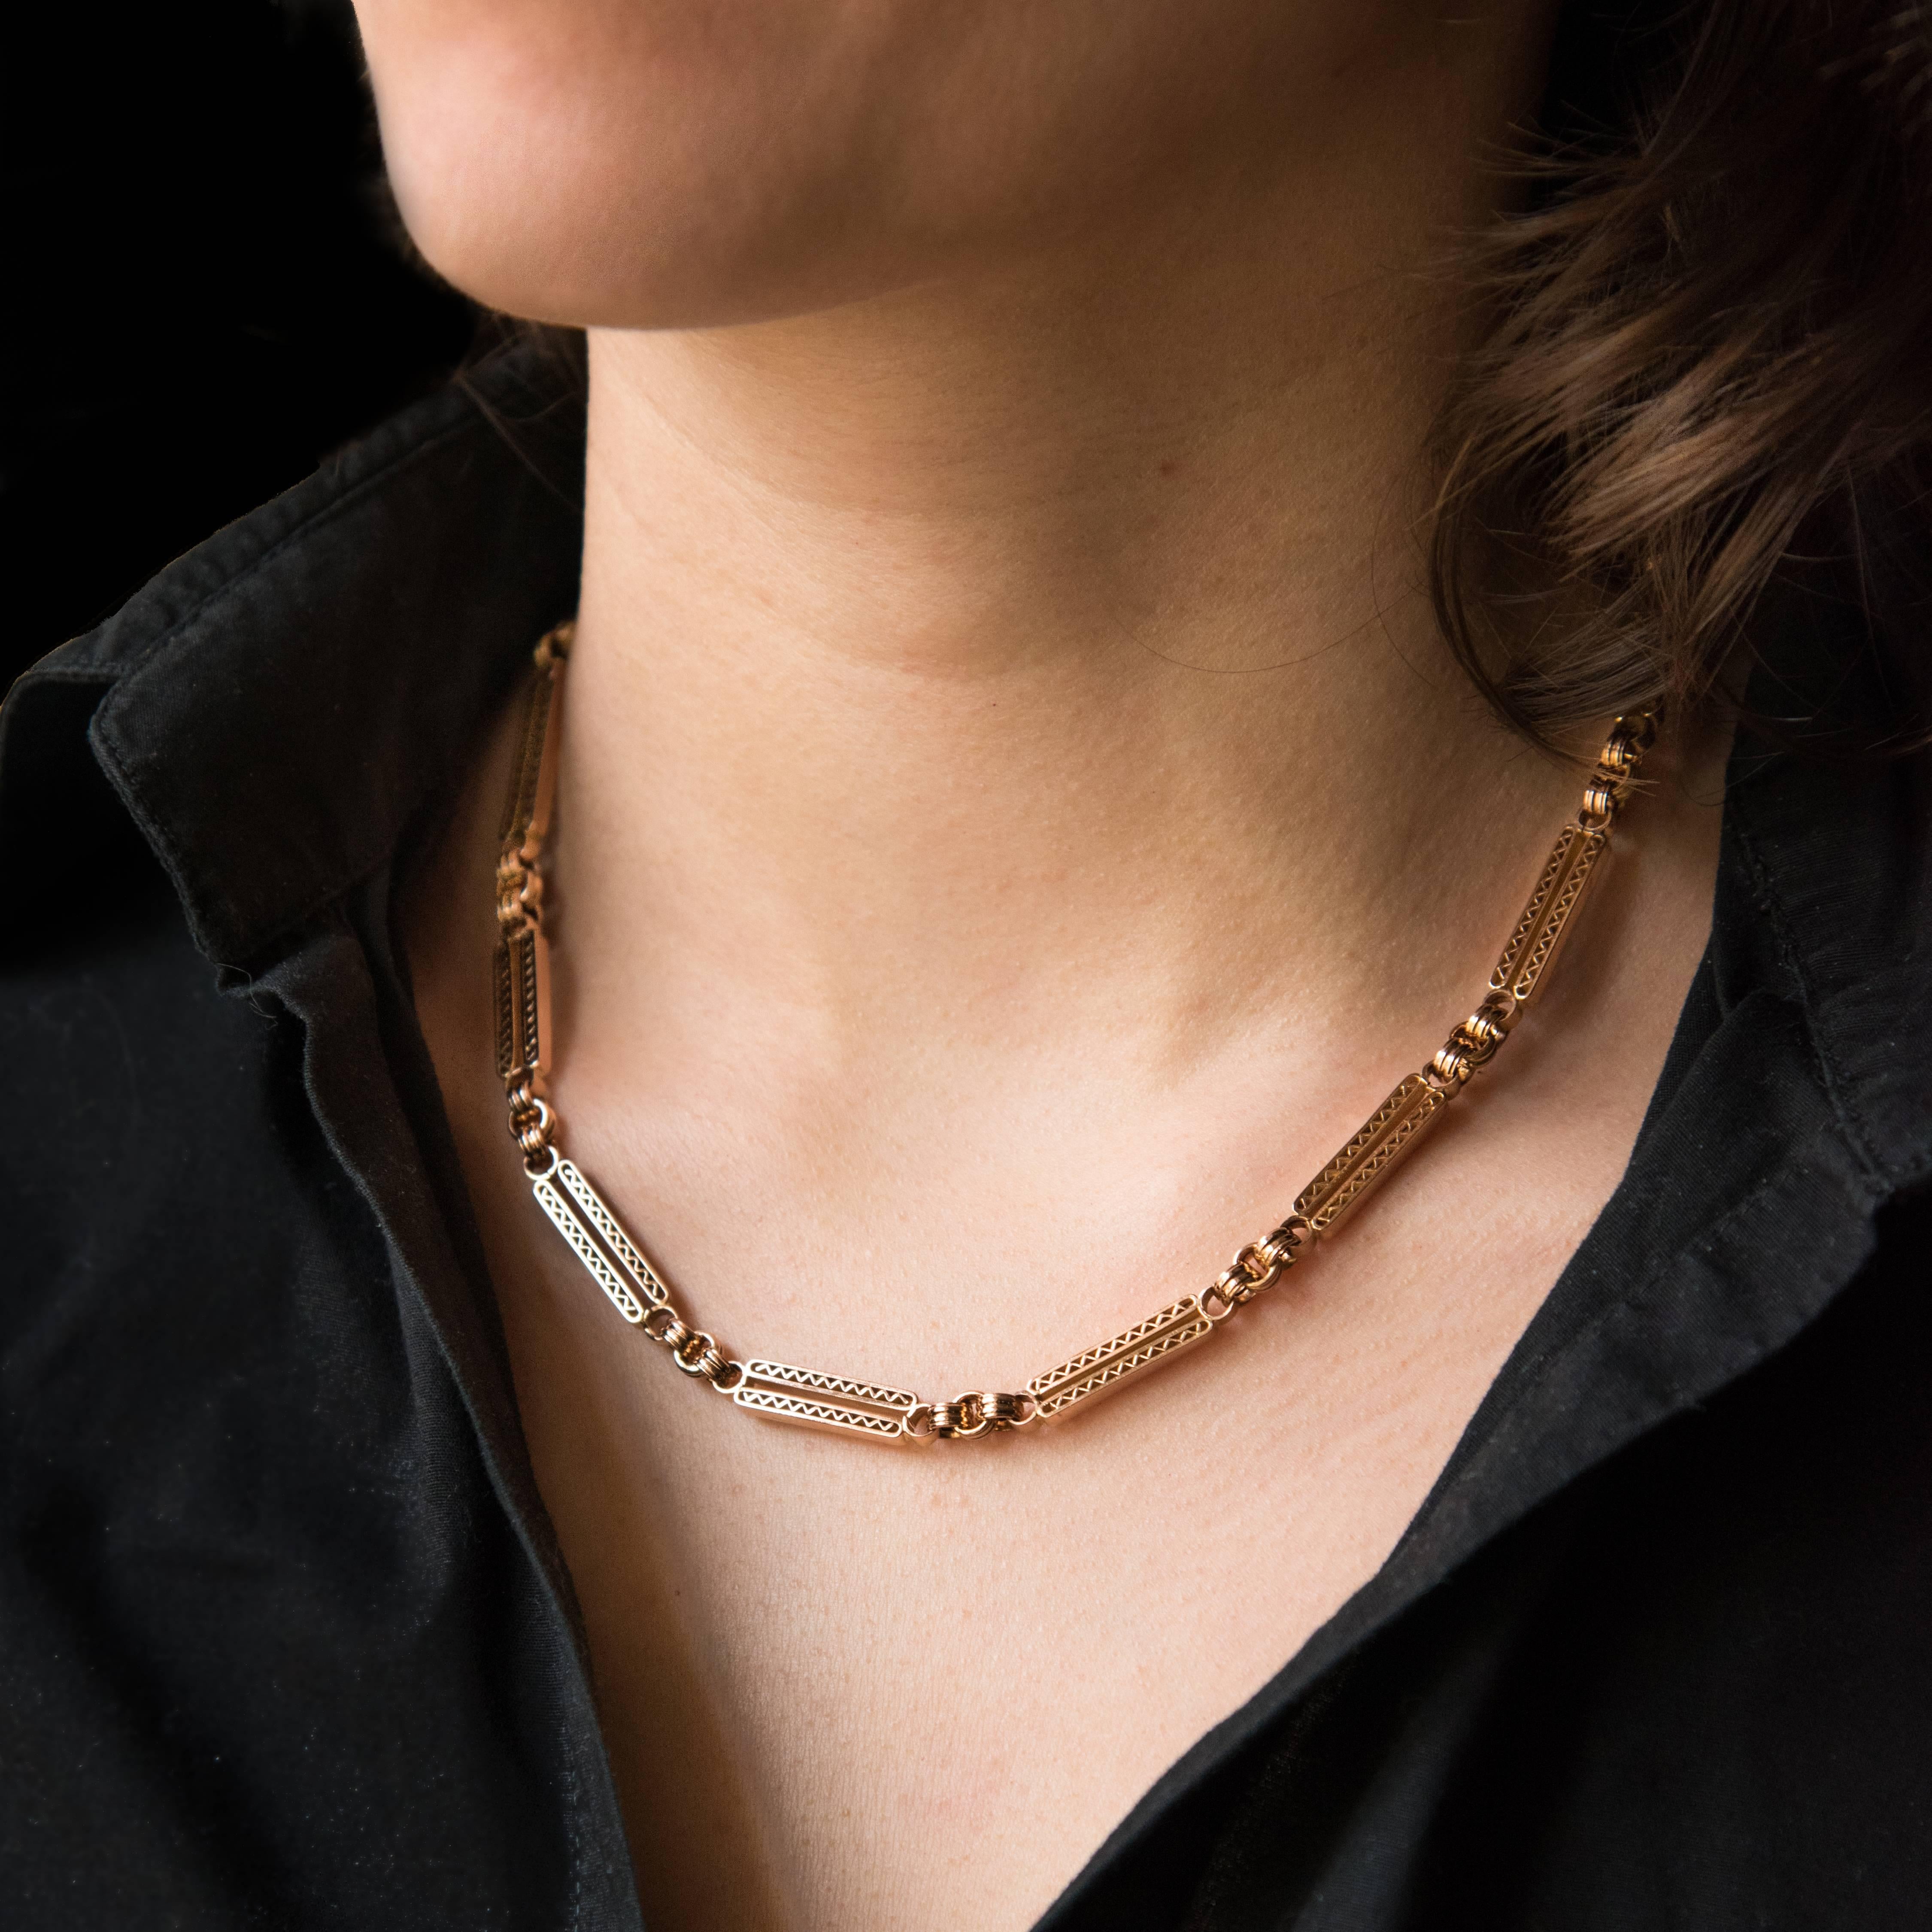 Chain in 18 carats rose gold and green gold, eagle's head hallmark.
Sublime antique rose gold chain, this antique watch chain consists of rectangular openwork links separated from rings of rose gold. This antique rose gold necklace closes with a